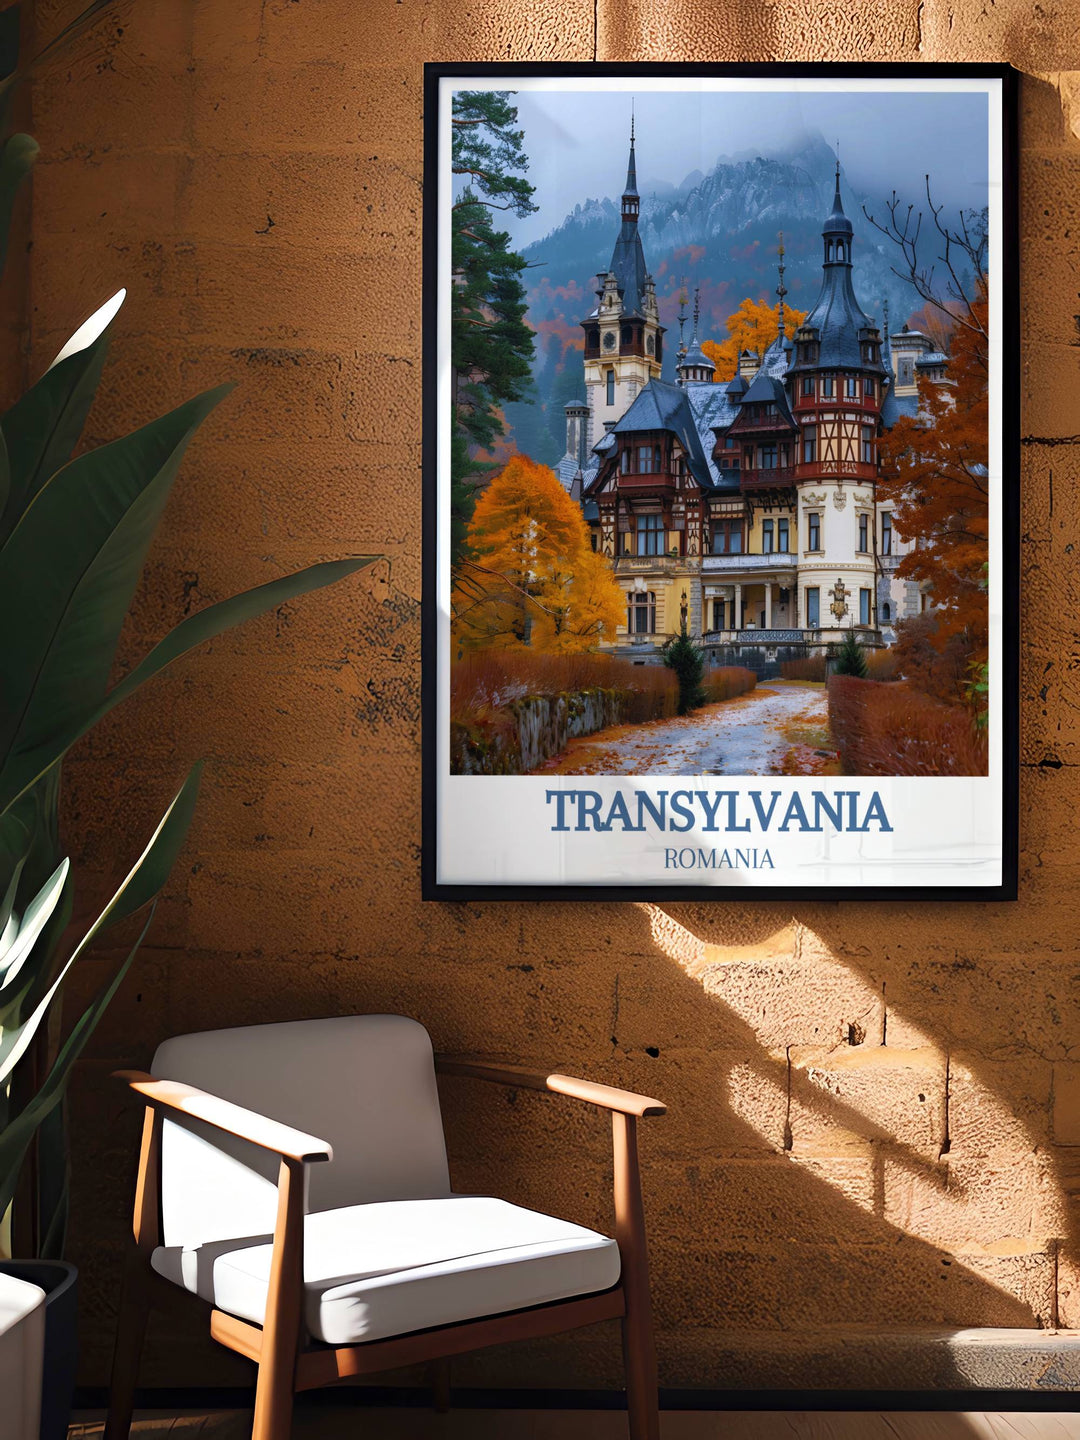 Vintage posters of Peleș Castle capturing the charm and grandeur of Romanias royal history, perfect for adding a distinctive piece of decor to any room.